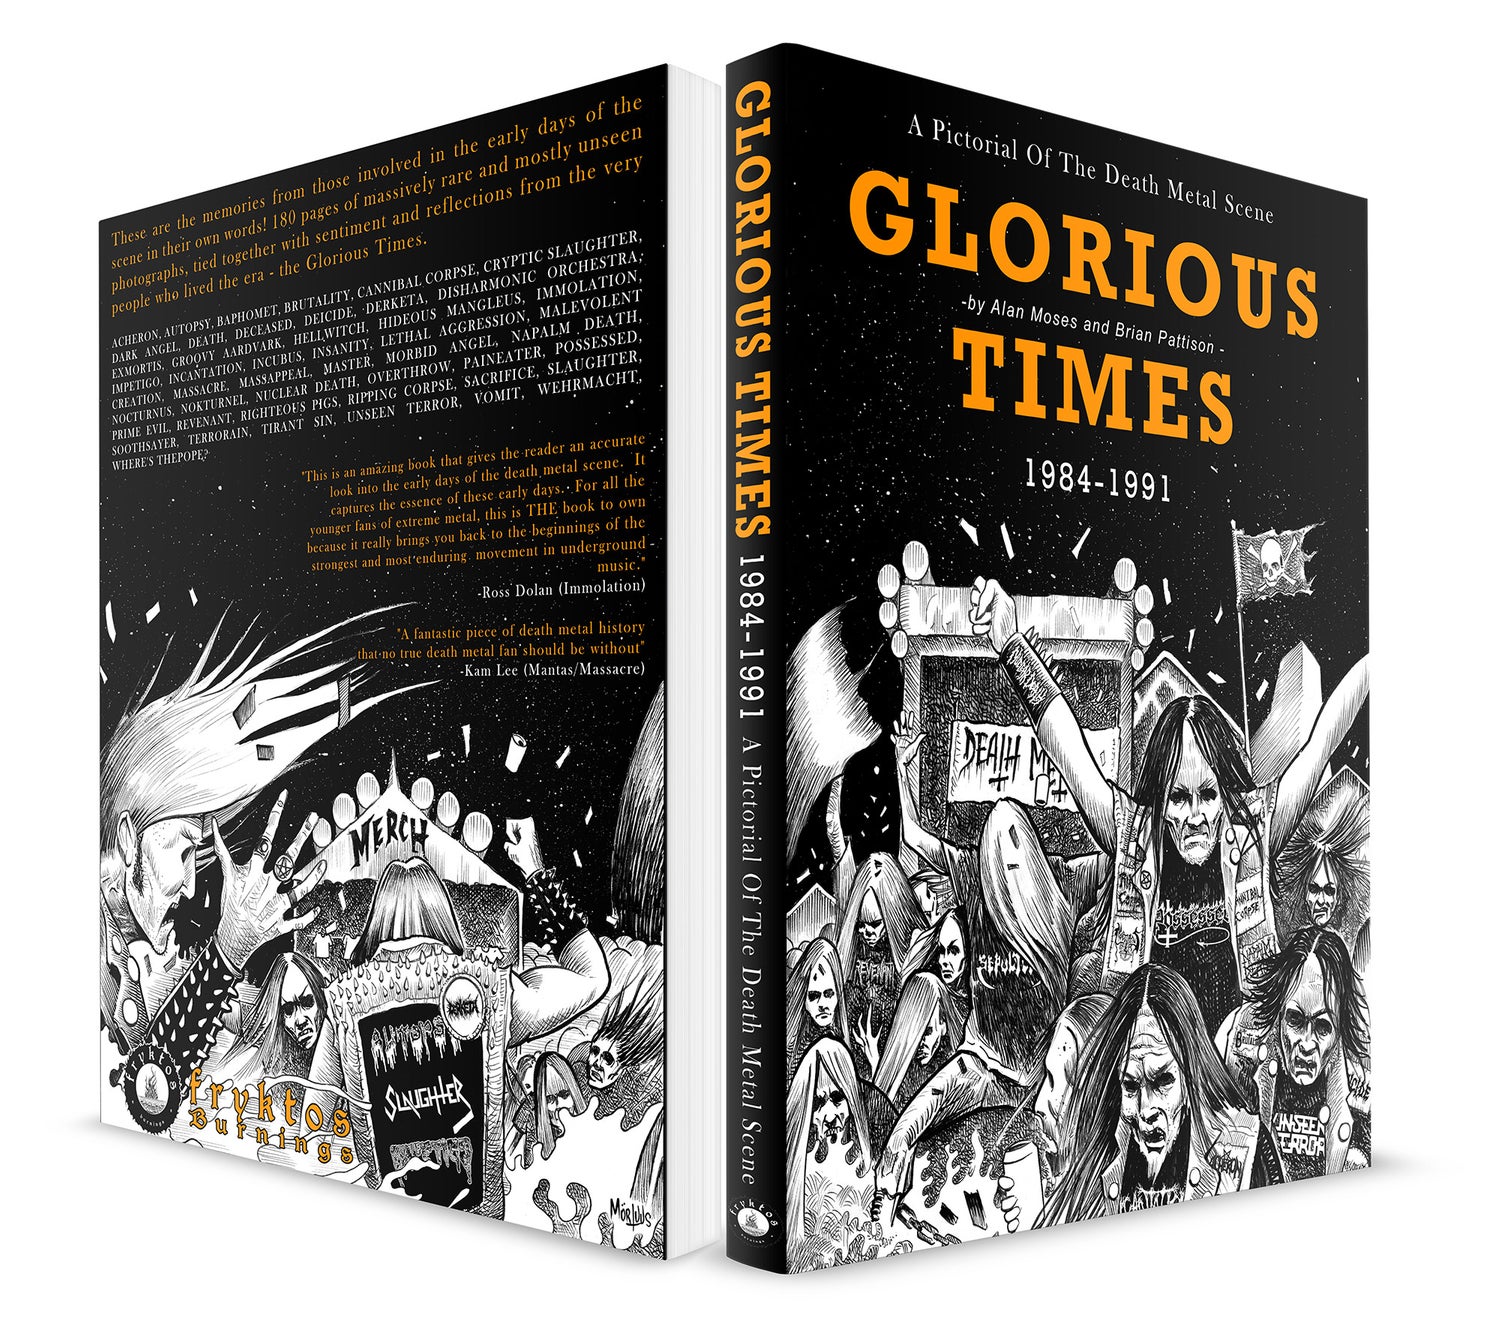 GLORIOUS TIMES “A Pictorial Of The Death Metal Scene – 1984-1991